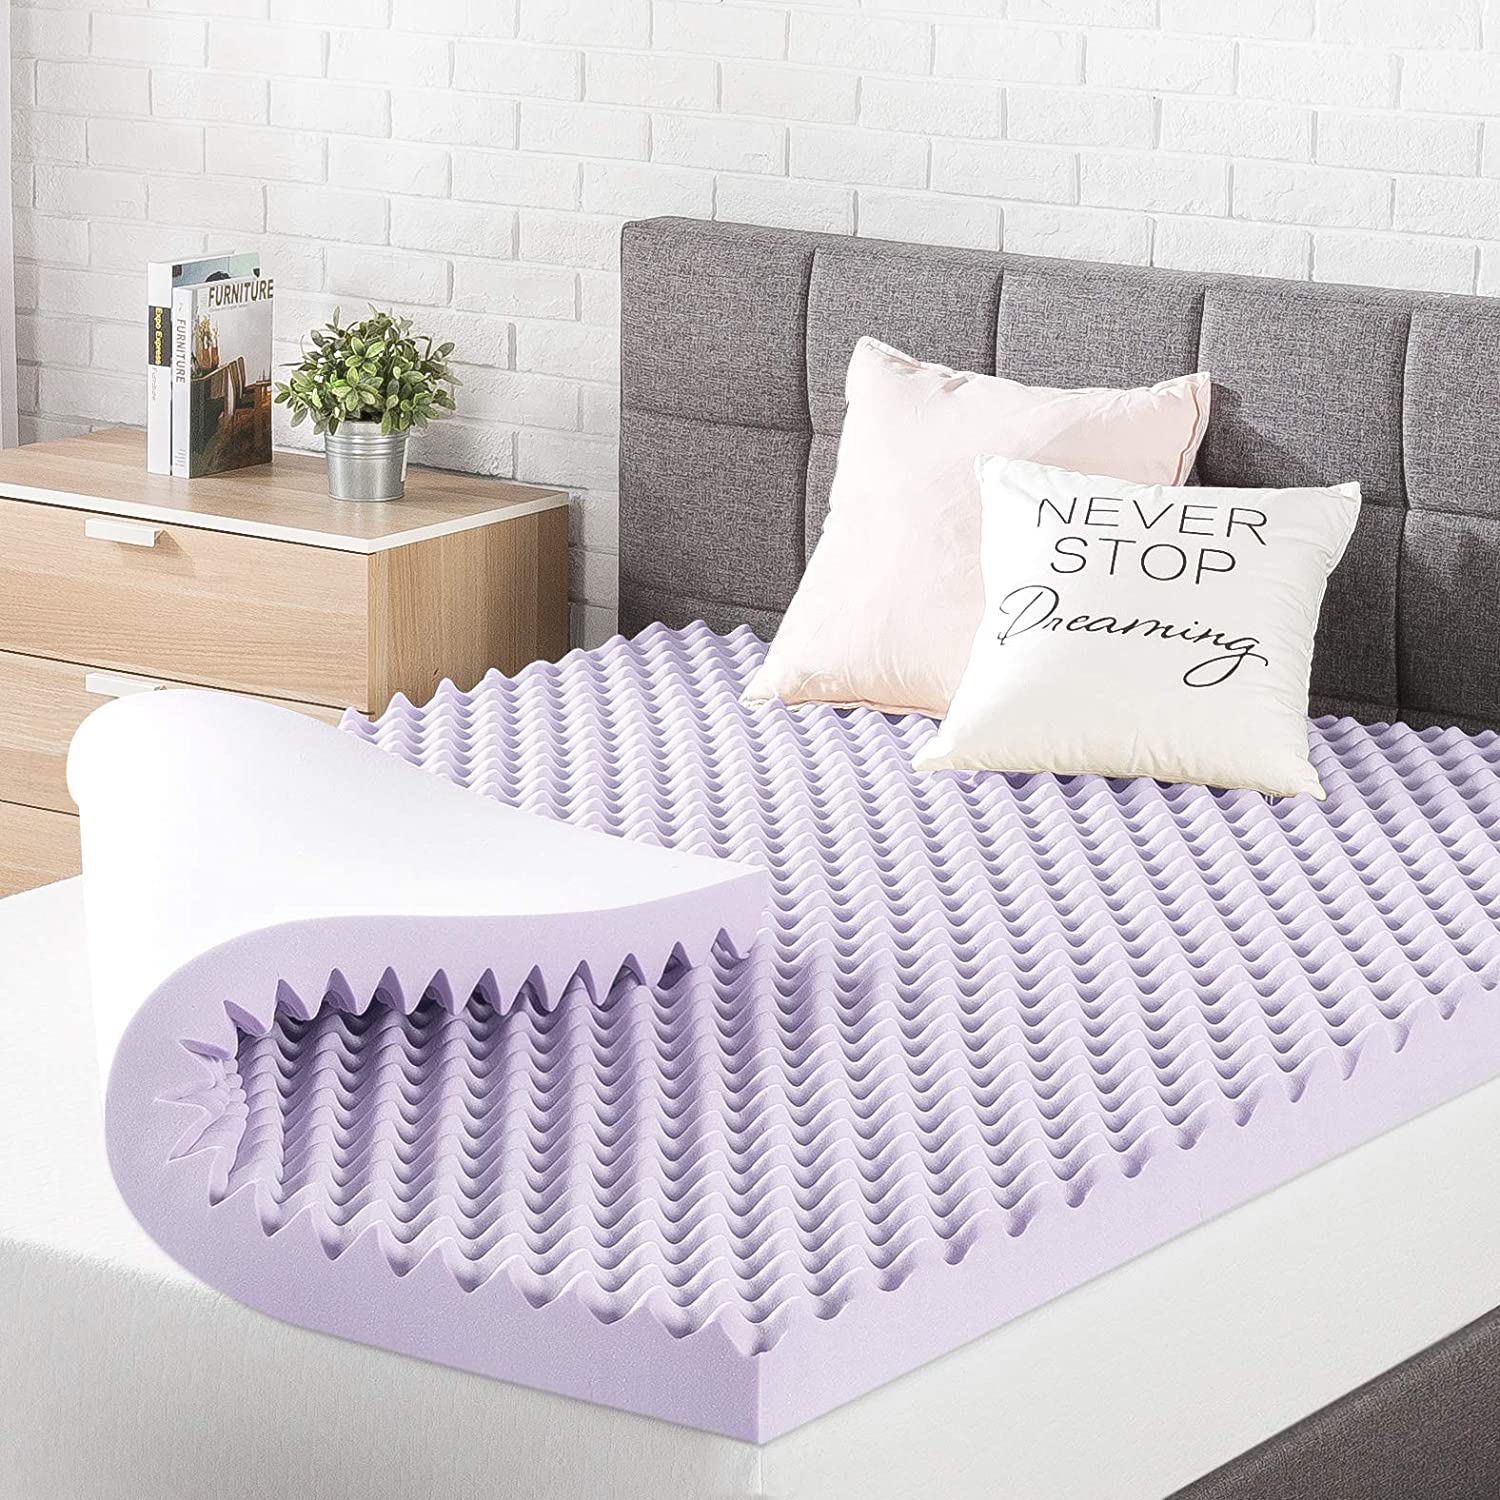 Best Price Mattress 3 Inch Egg Crate Memory Foam Mattress Topper with  Soothing L